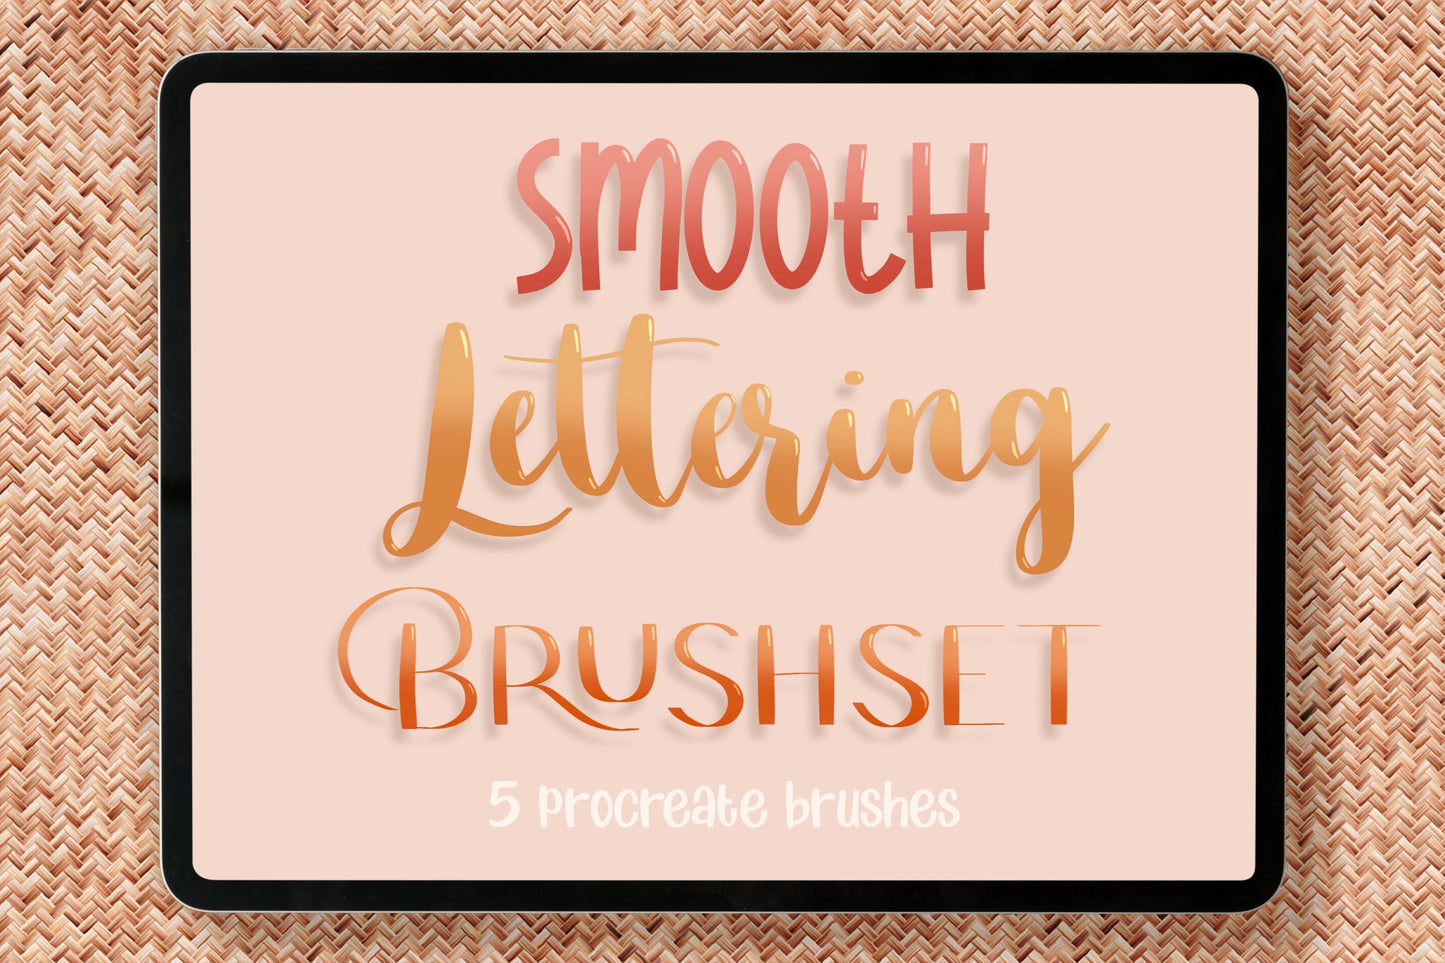 Smooth Lettering Procreate Brushes